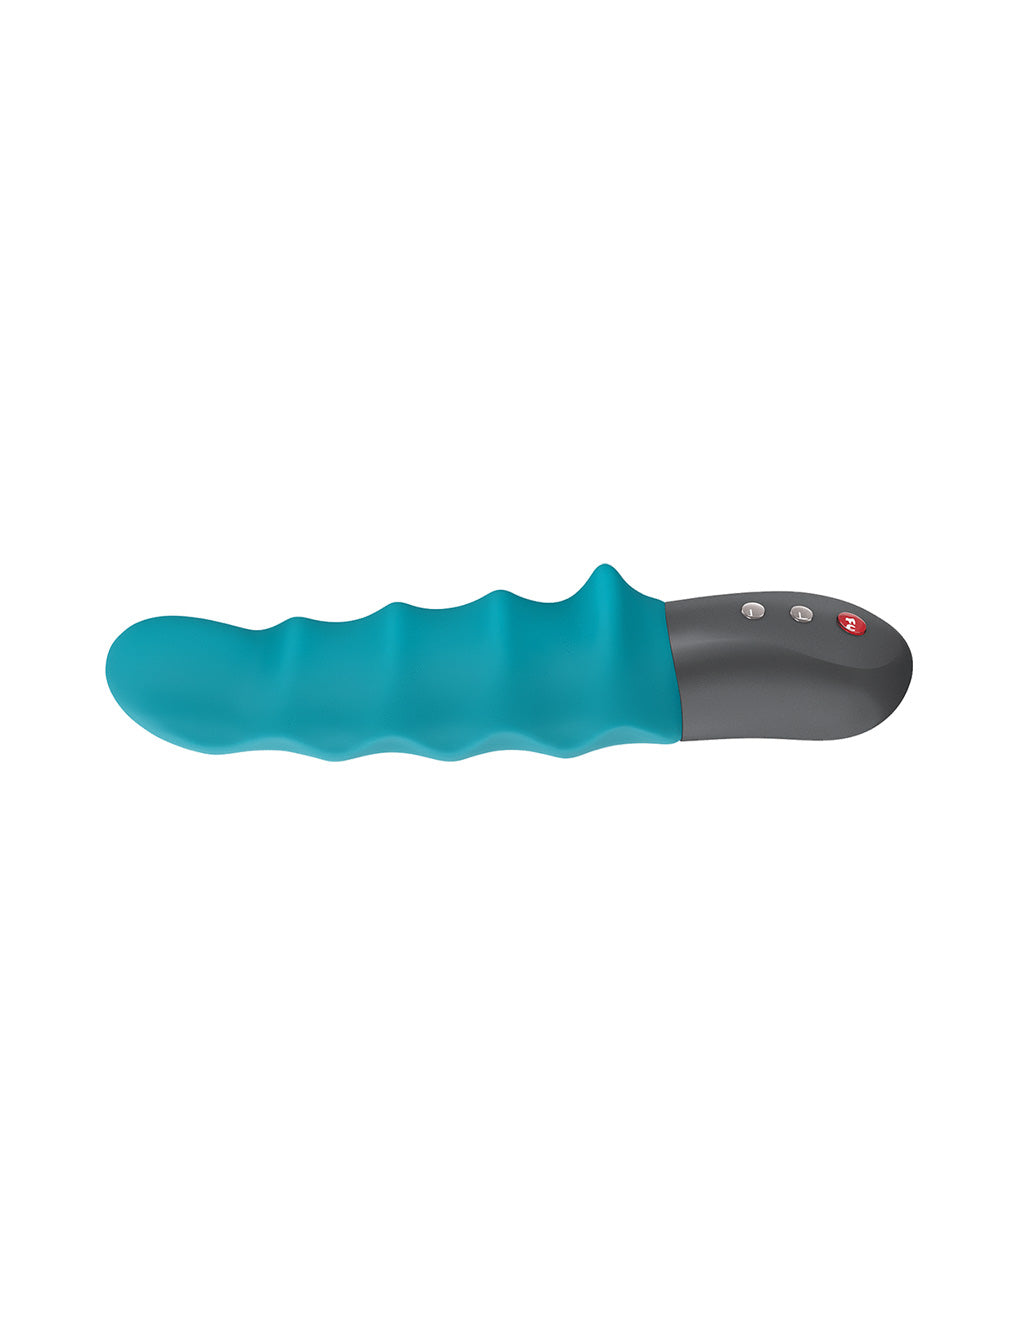 Stronic Surf Vibrator by Fun Factory blue laying